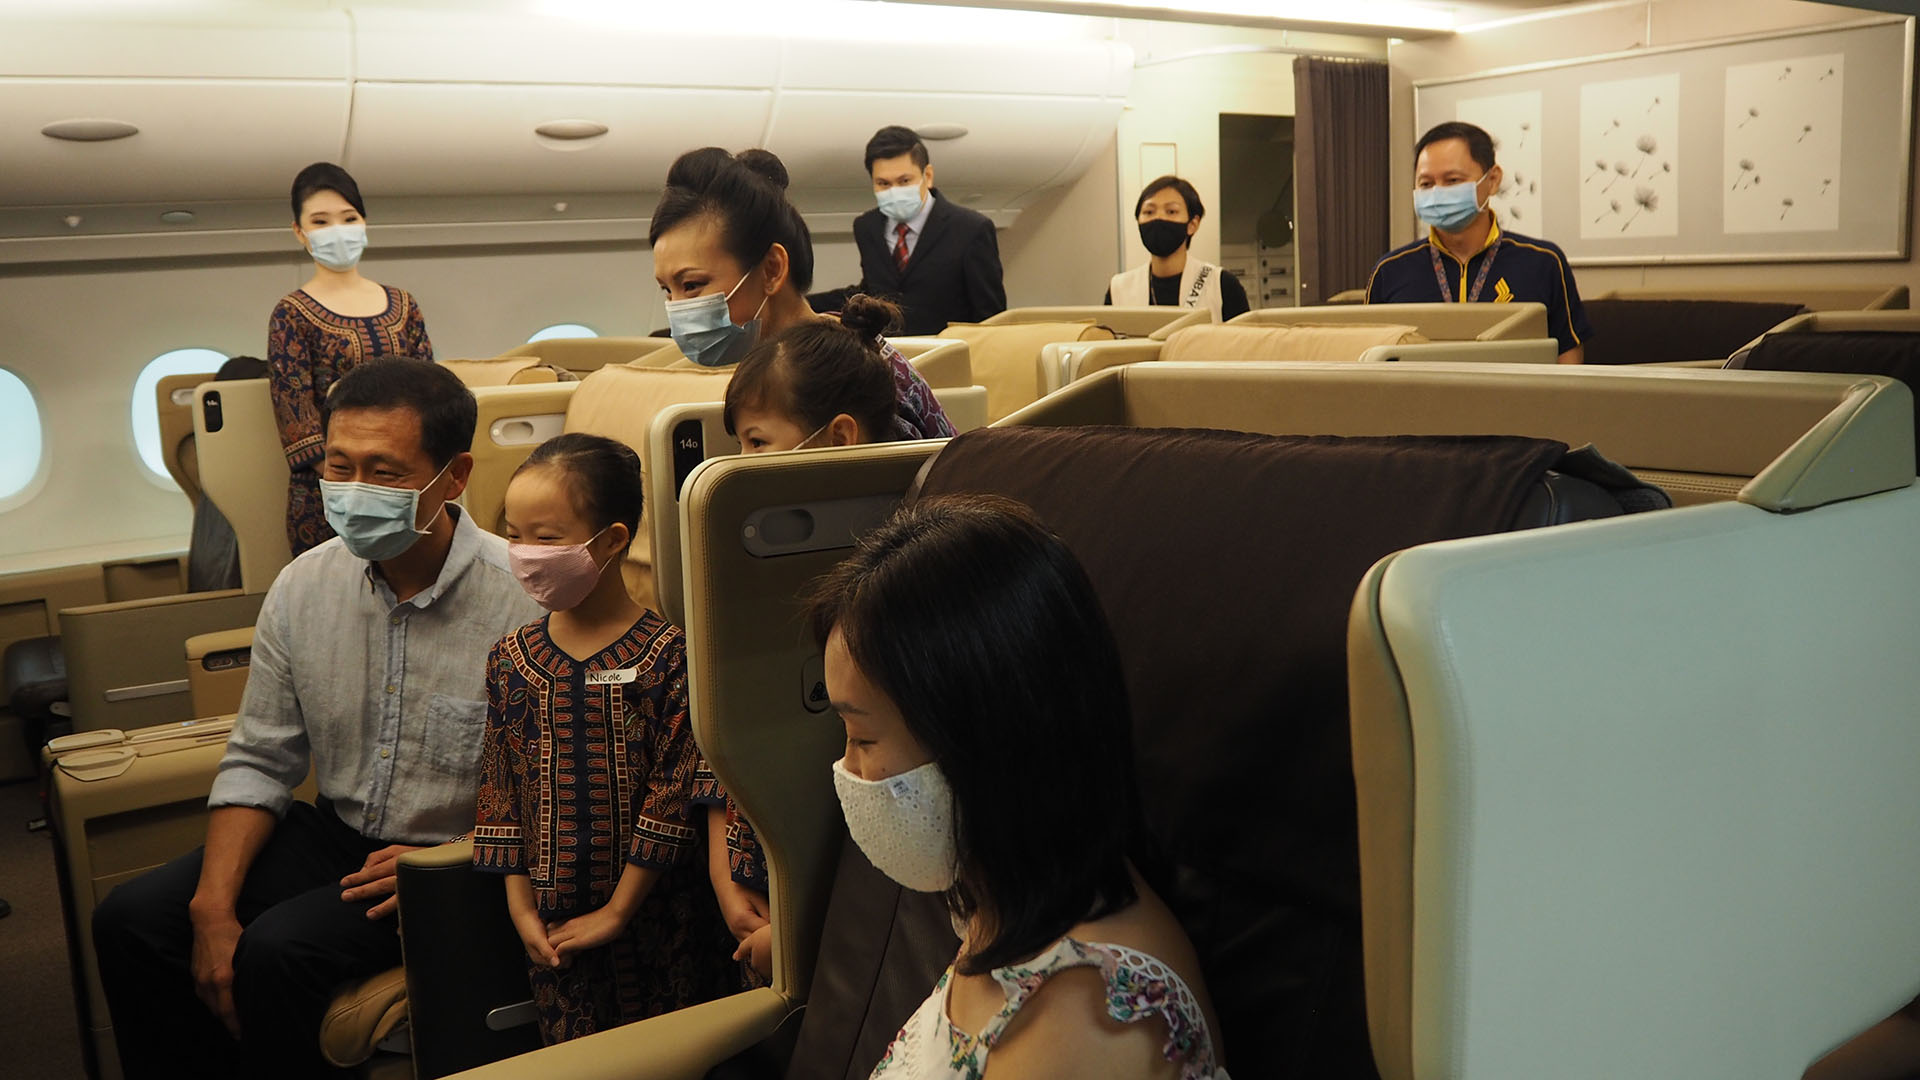 Transport minister Ong joins in the Junior Cabin Crew